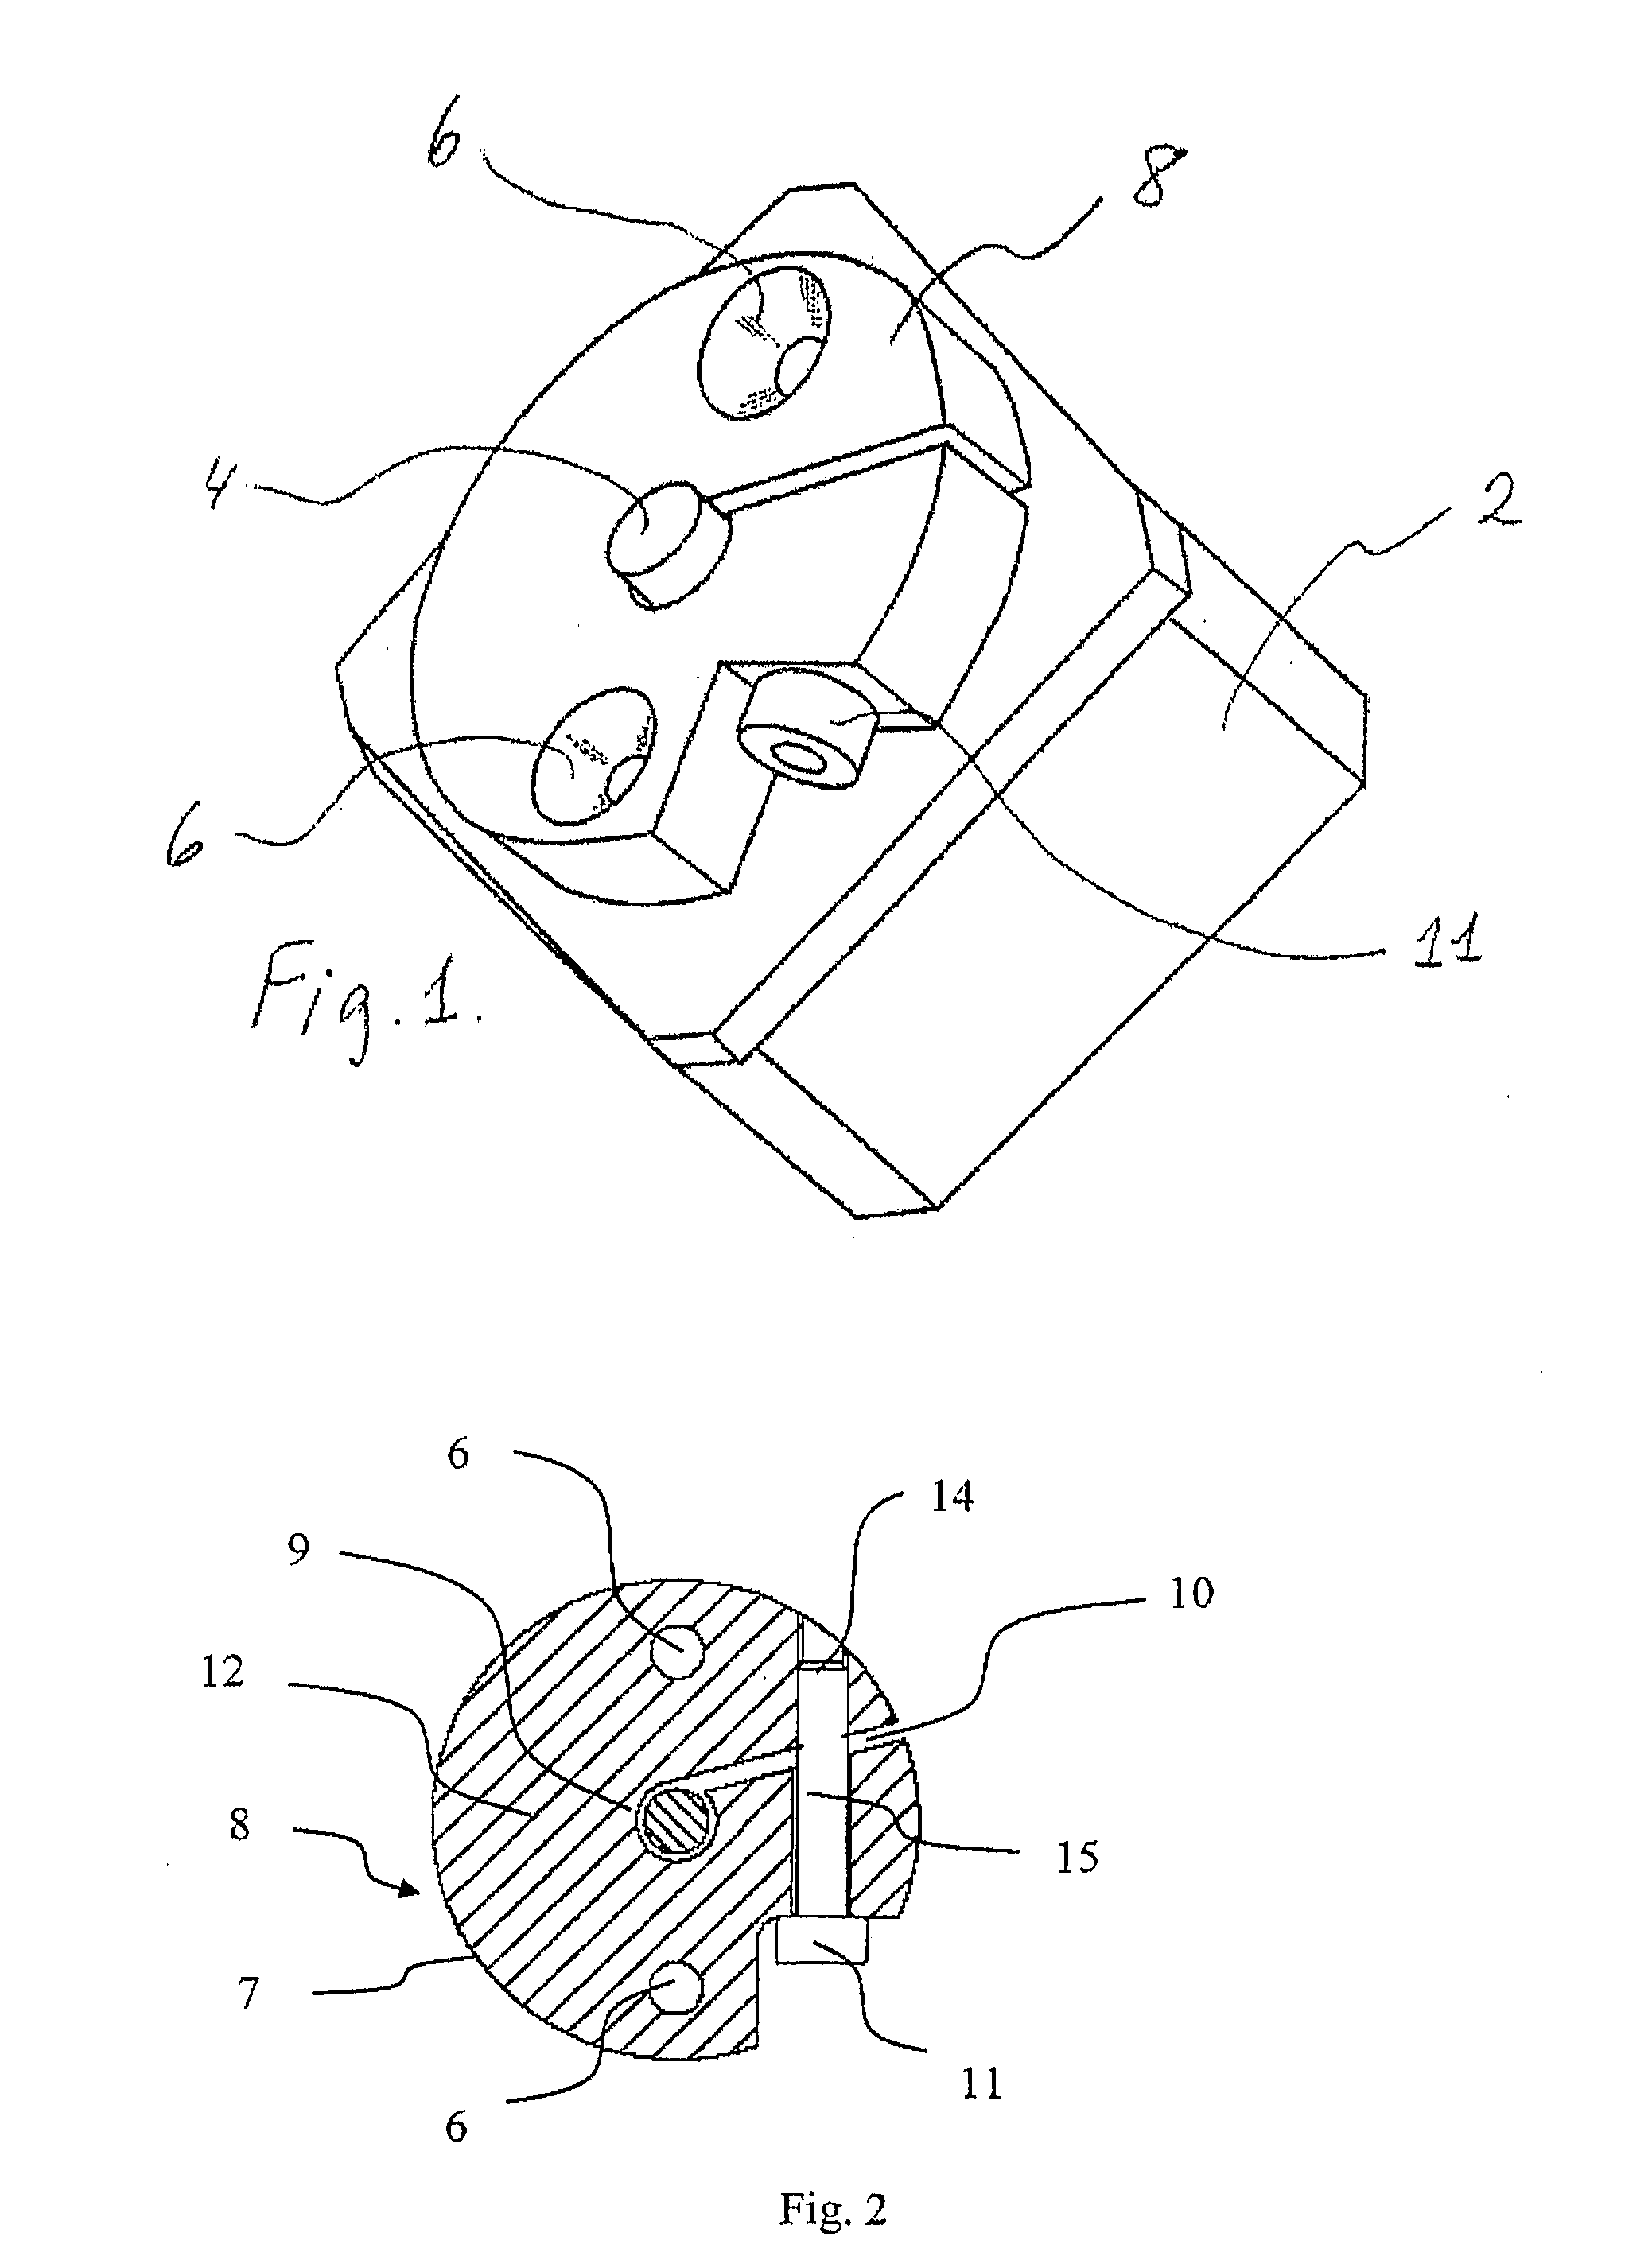 Adaptor for an Axle